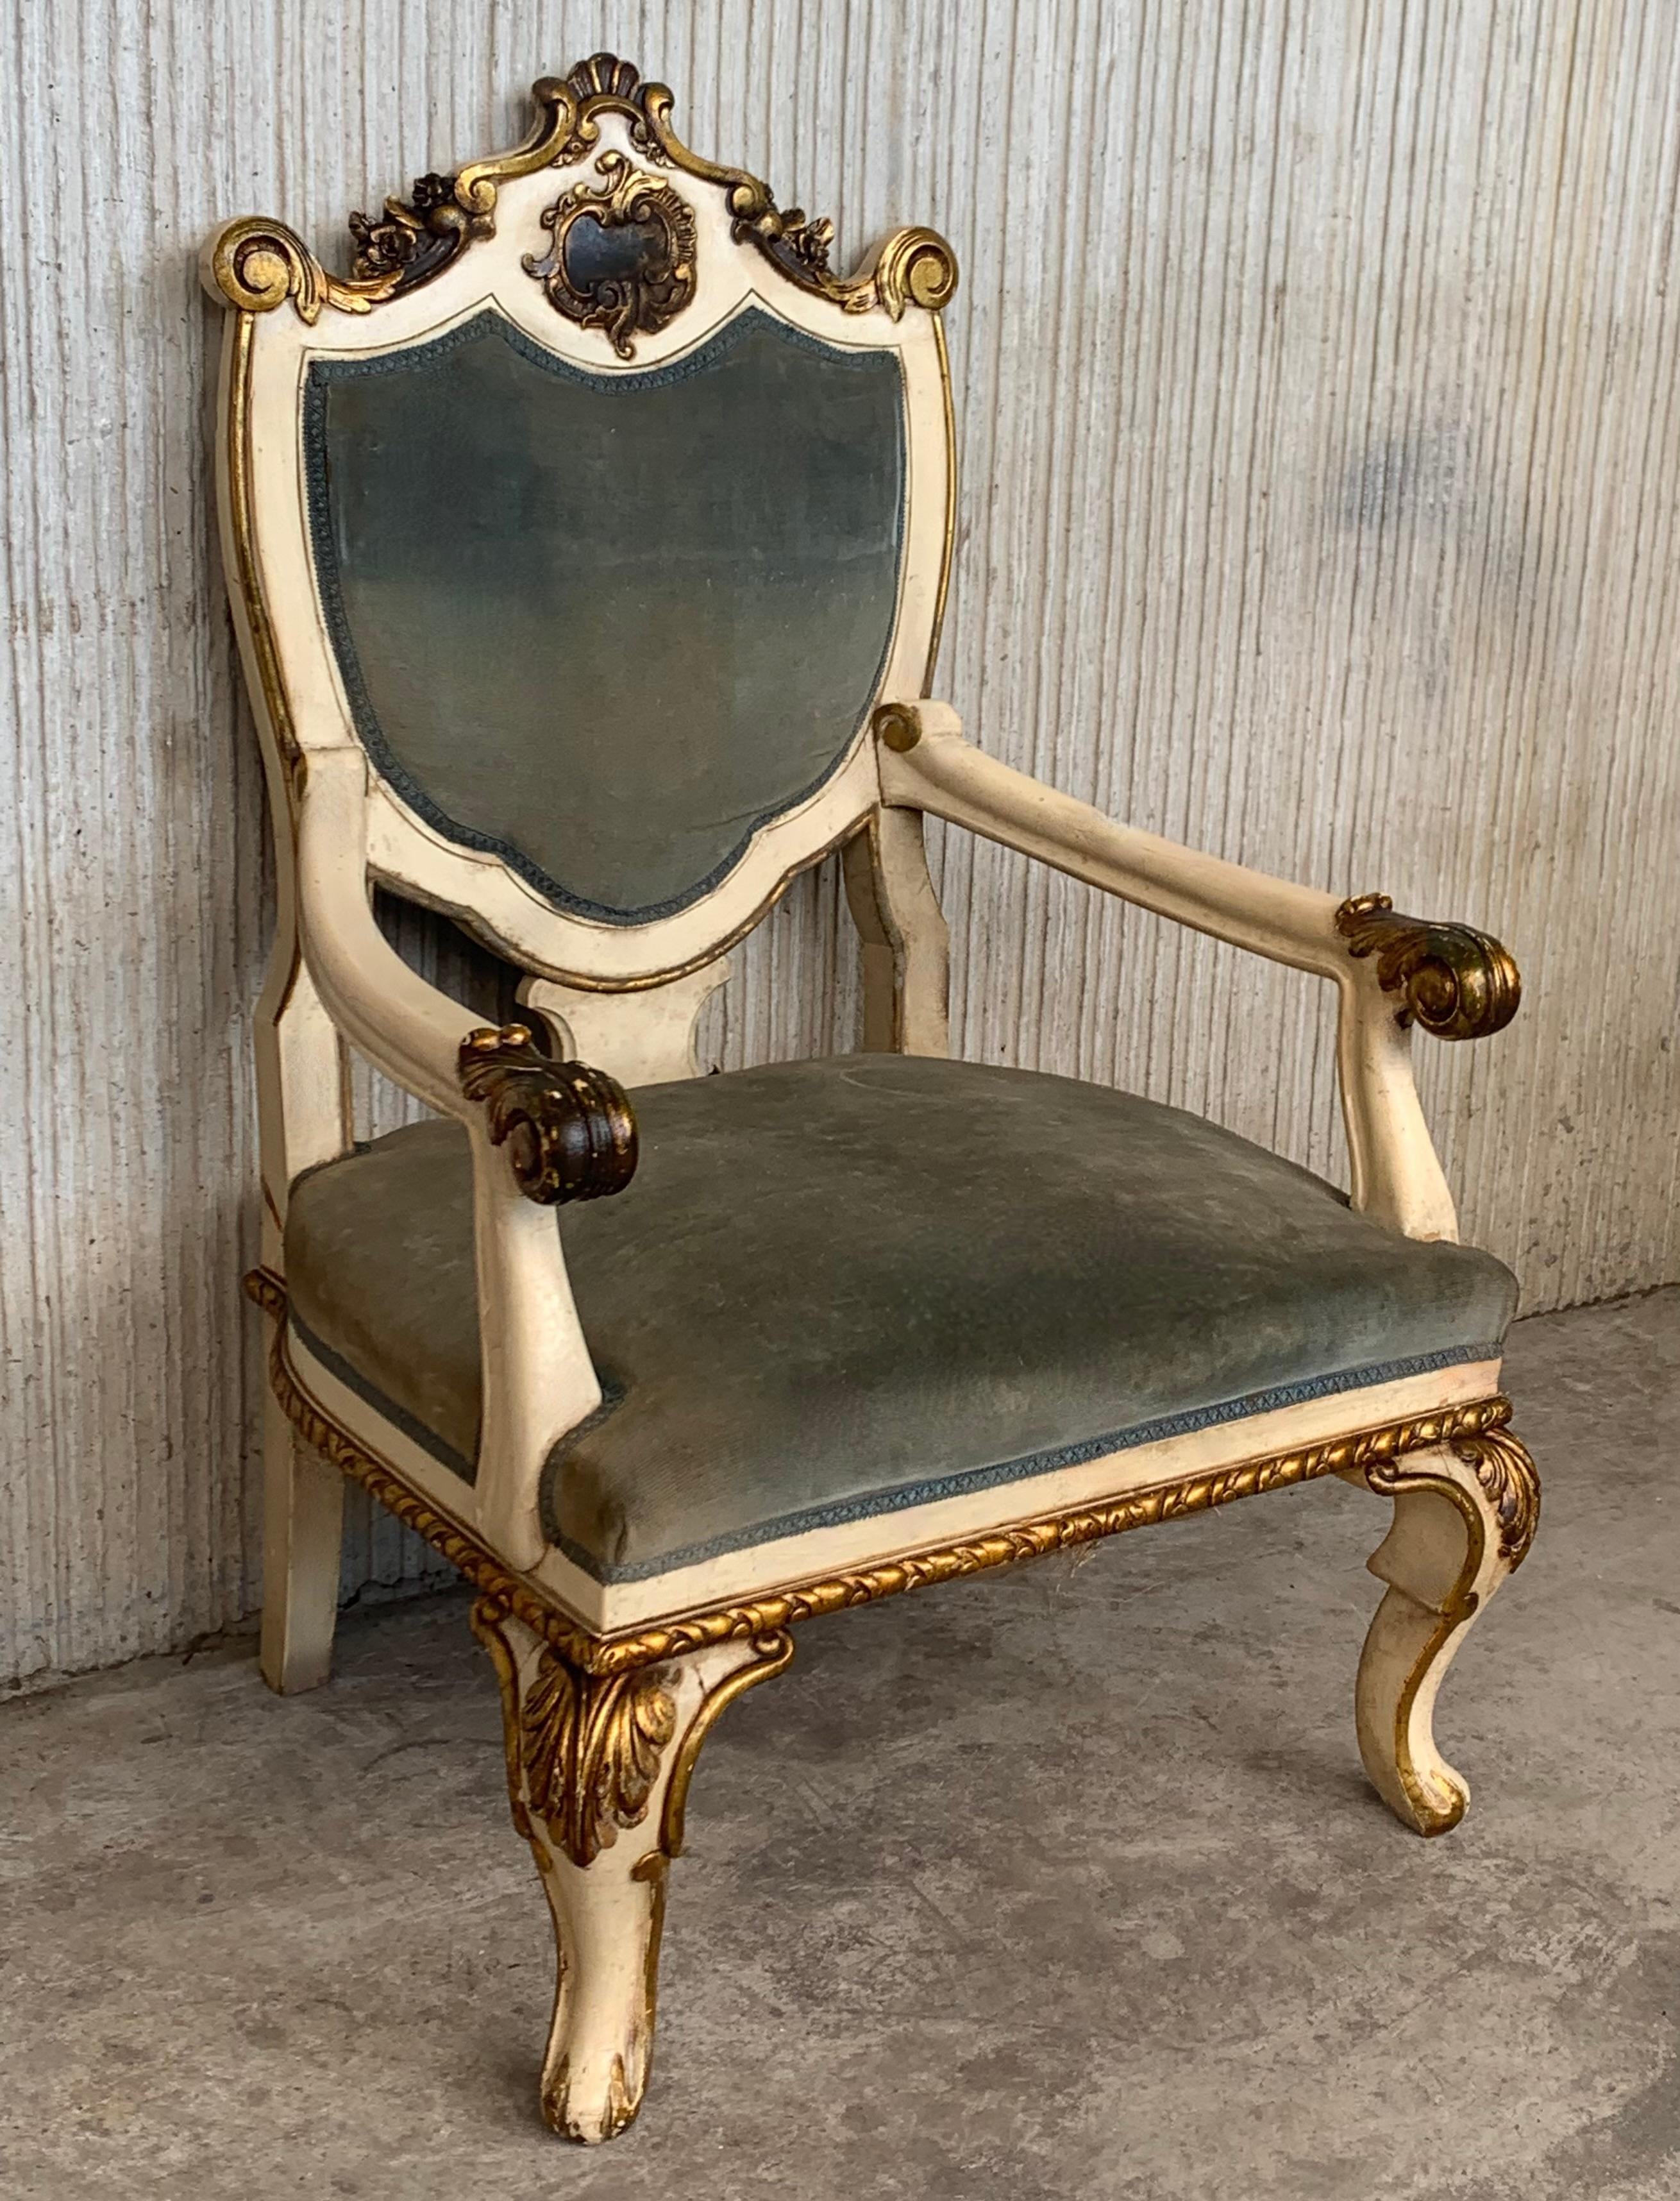 Pair of Venetian Hand Painted Armchairs in White Antique Painting and Giltwood In Good Condition For Sale In Miami, FL